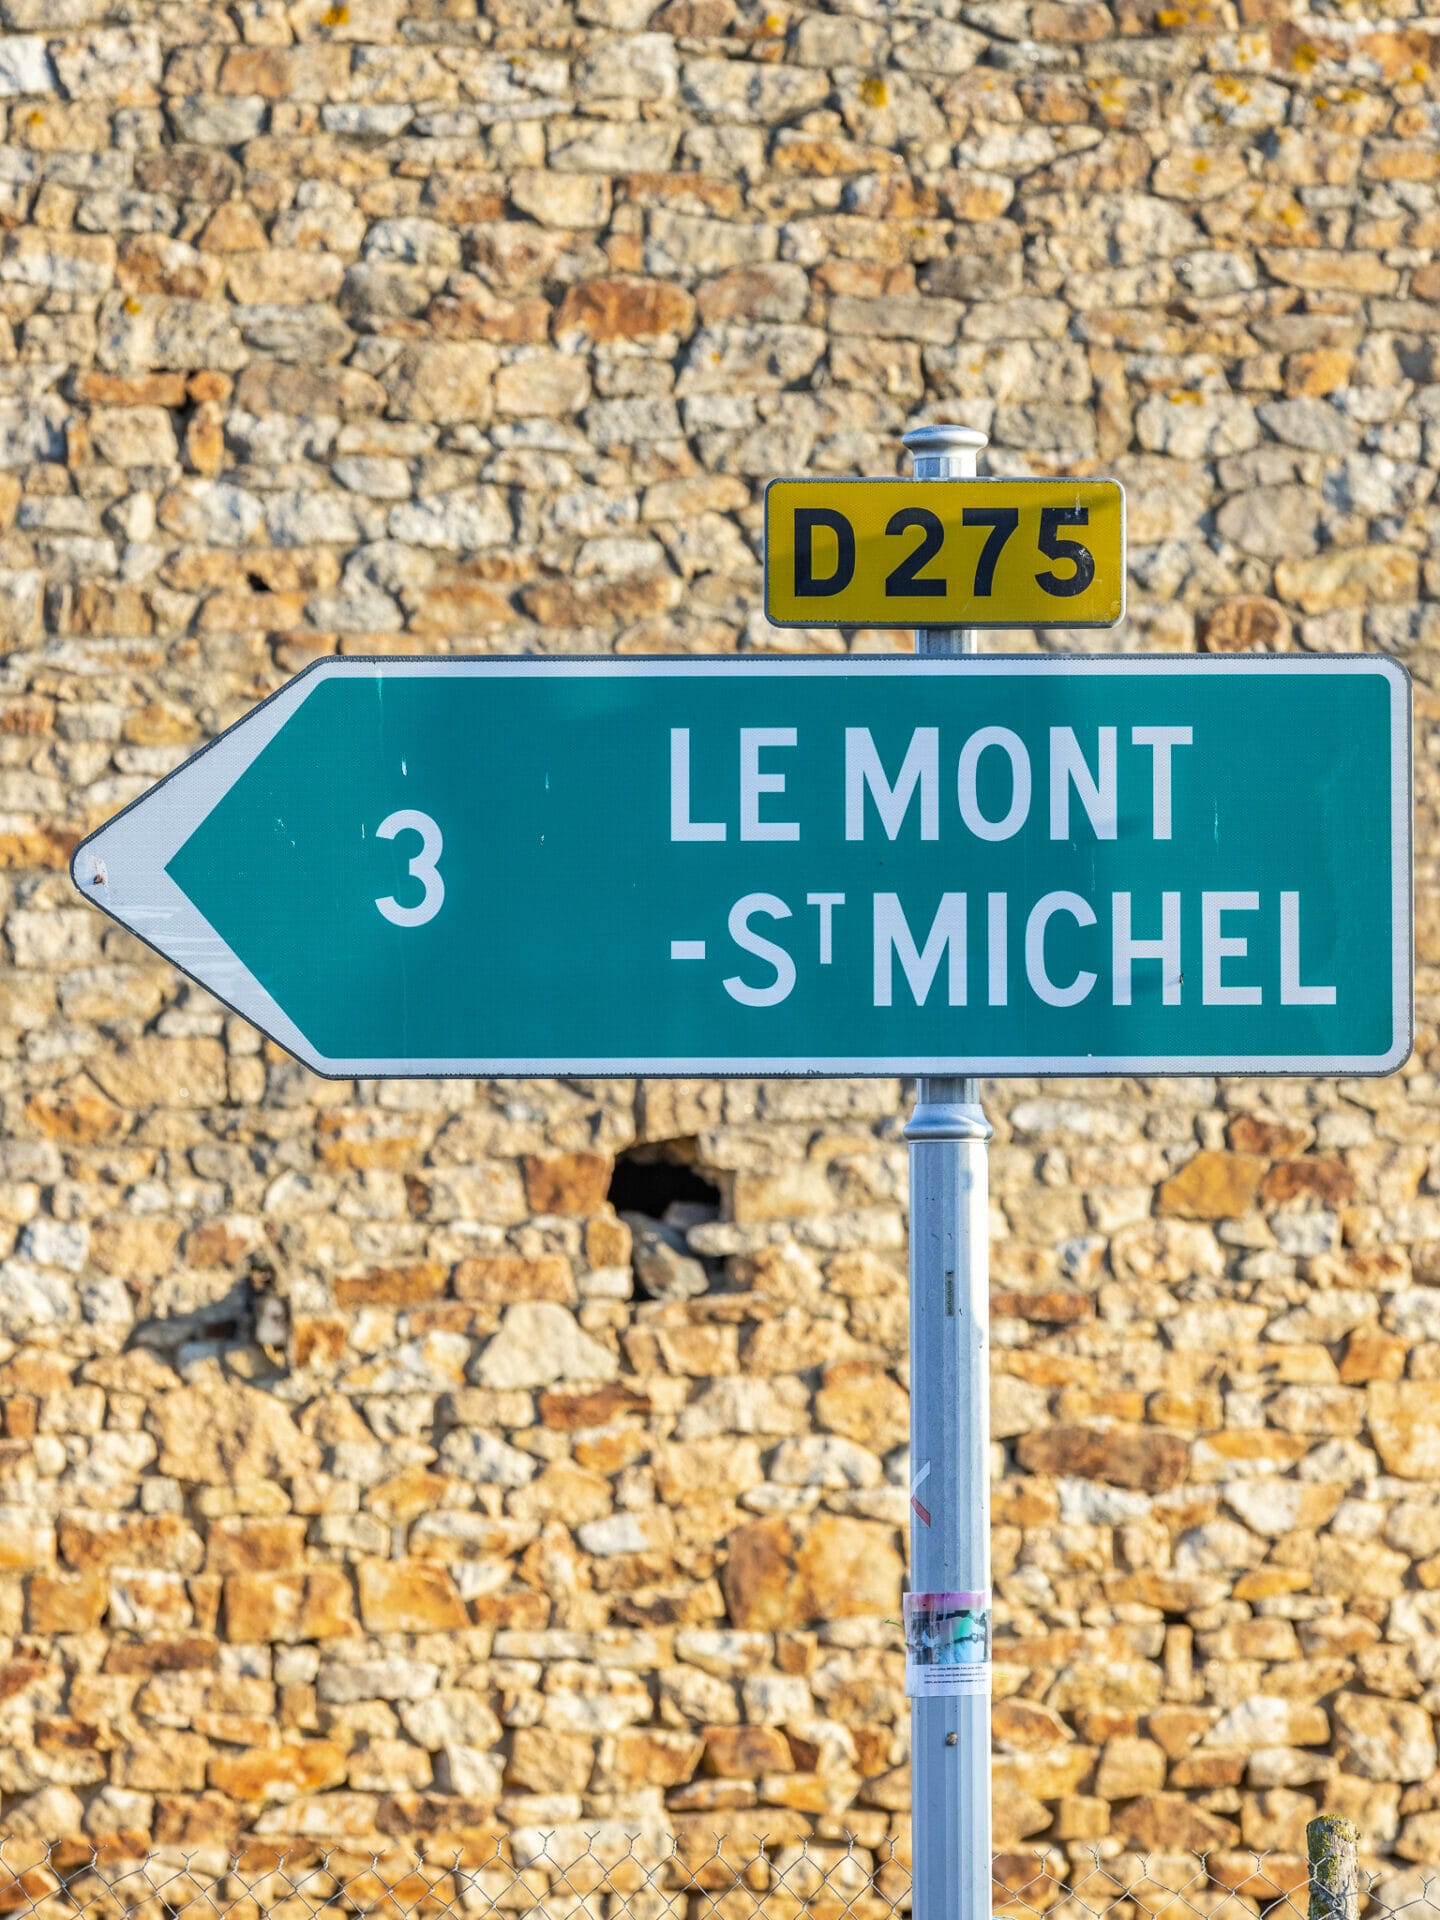 Green street sign pointing left with "Le Mont St Michel" written on it on old stone background